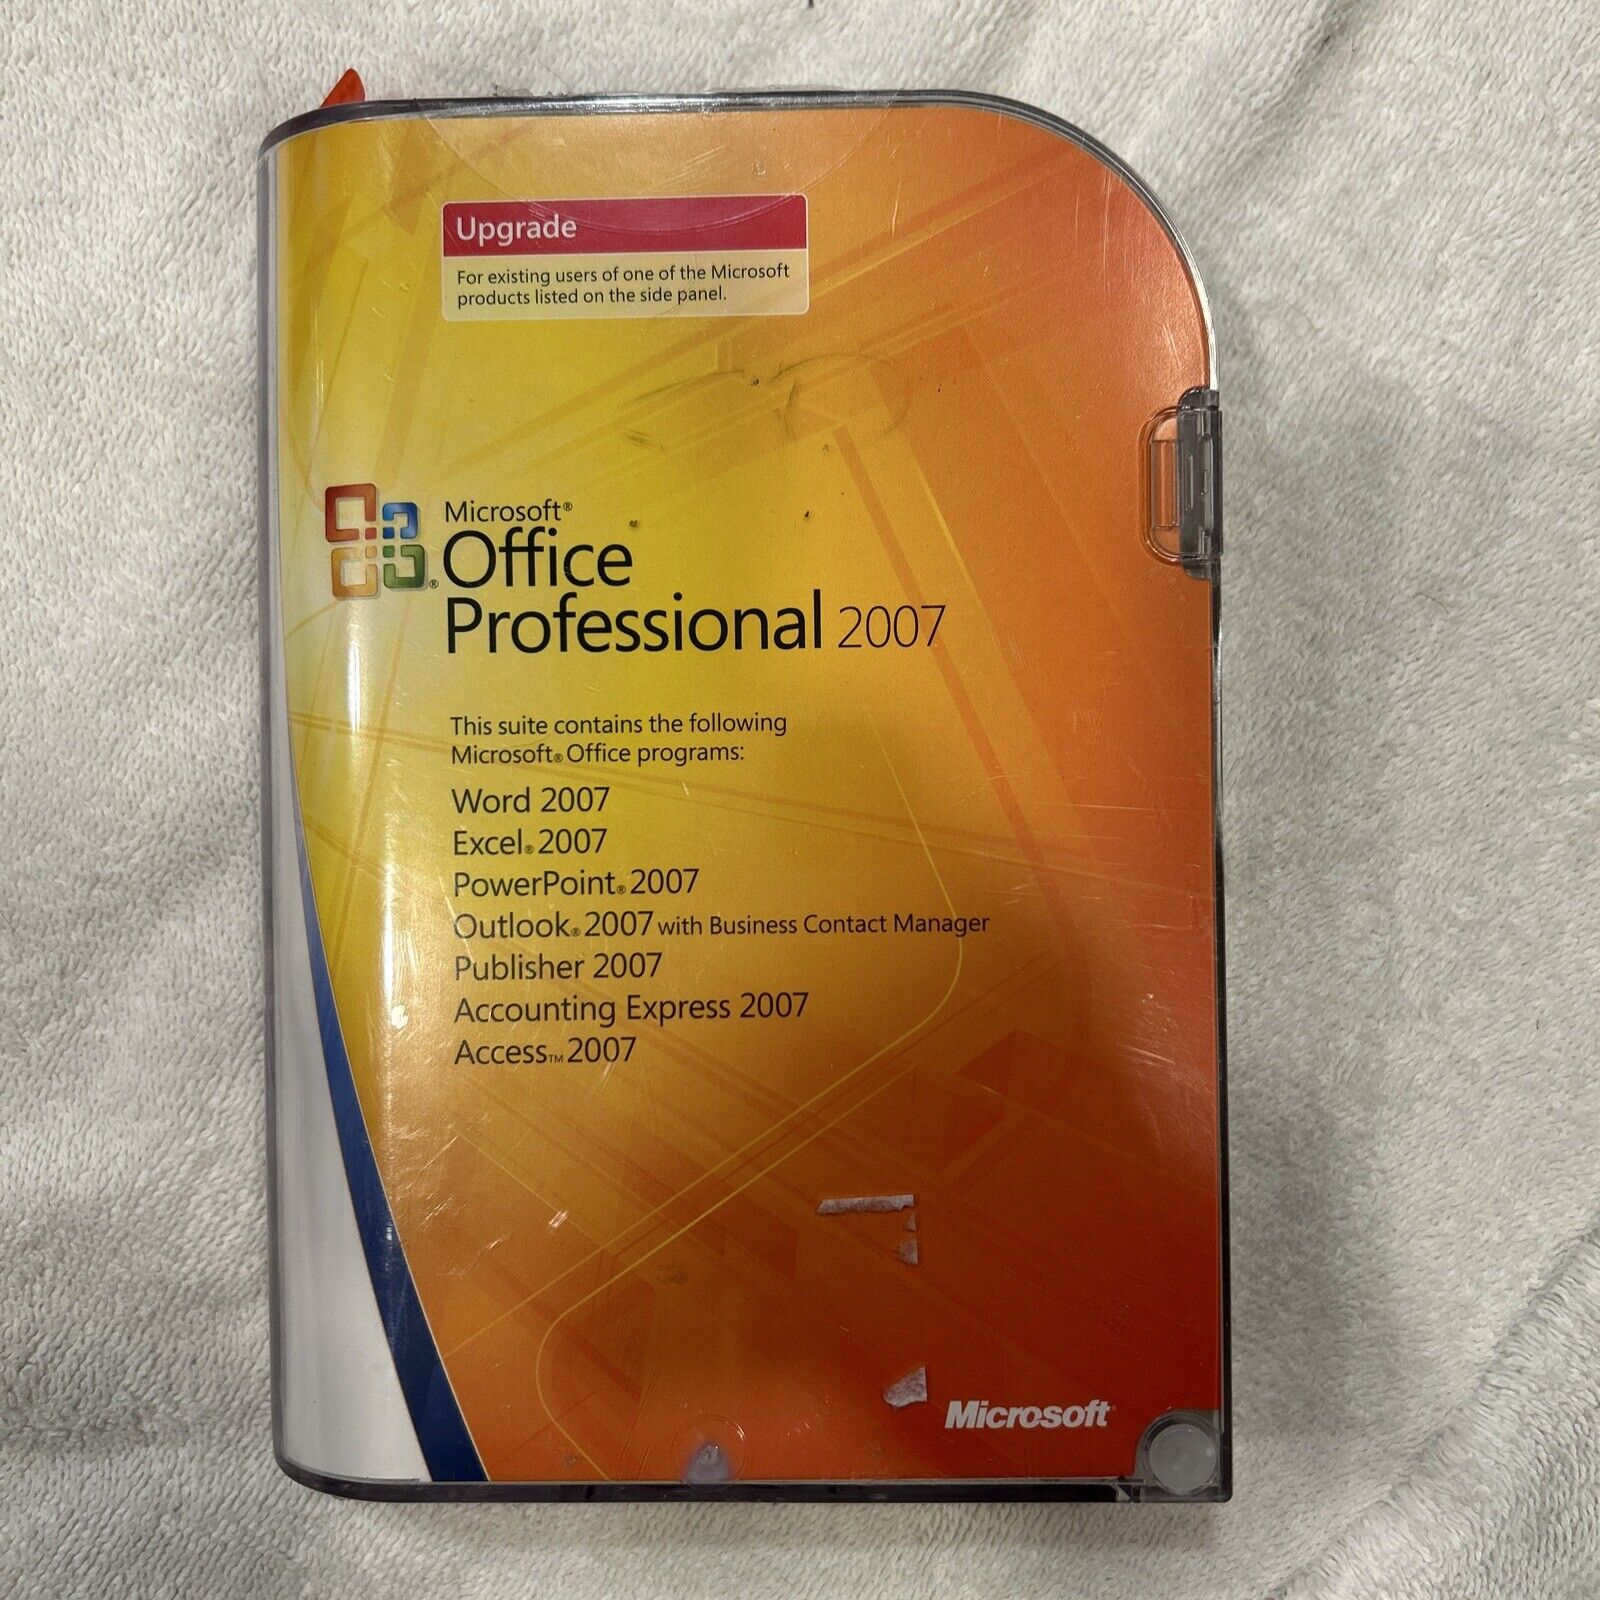 Microsoft Office Professional 2007 - Upgrade  SEALED New  CONDITION